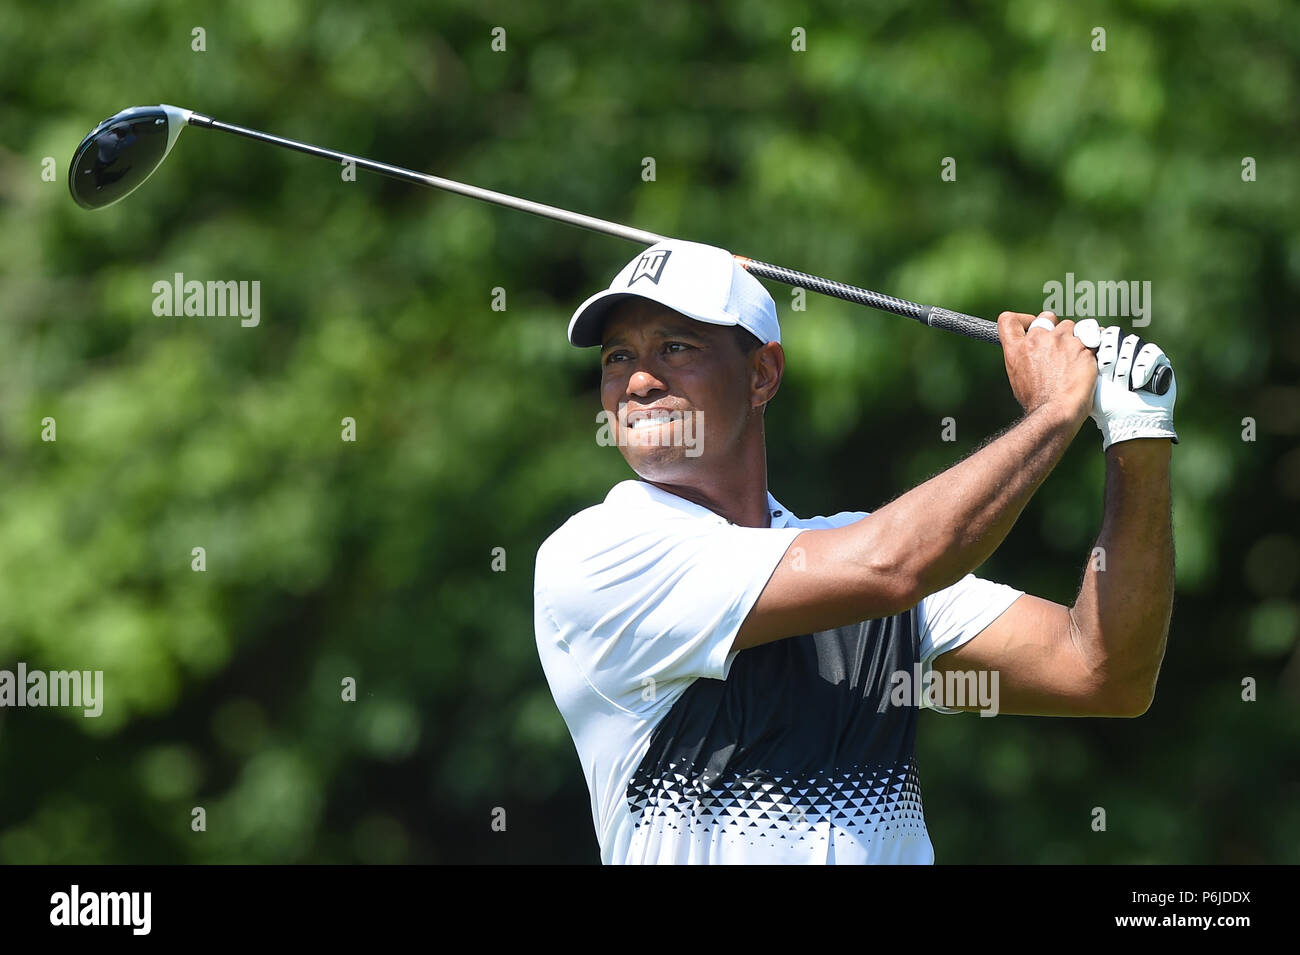 JUNE 30, 2018 - Tiger Woods (USA) tees off at the fifteenth hole during the third round at the 2018 Quicken Loans National at the Tournament Players Club in Potomac MD. Stock Photo